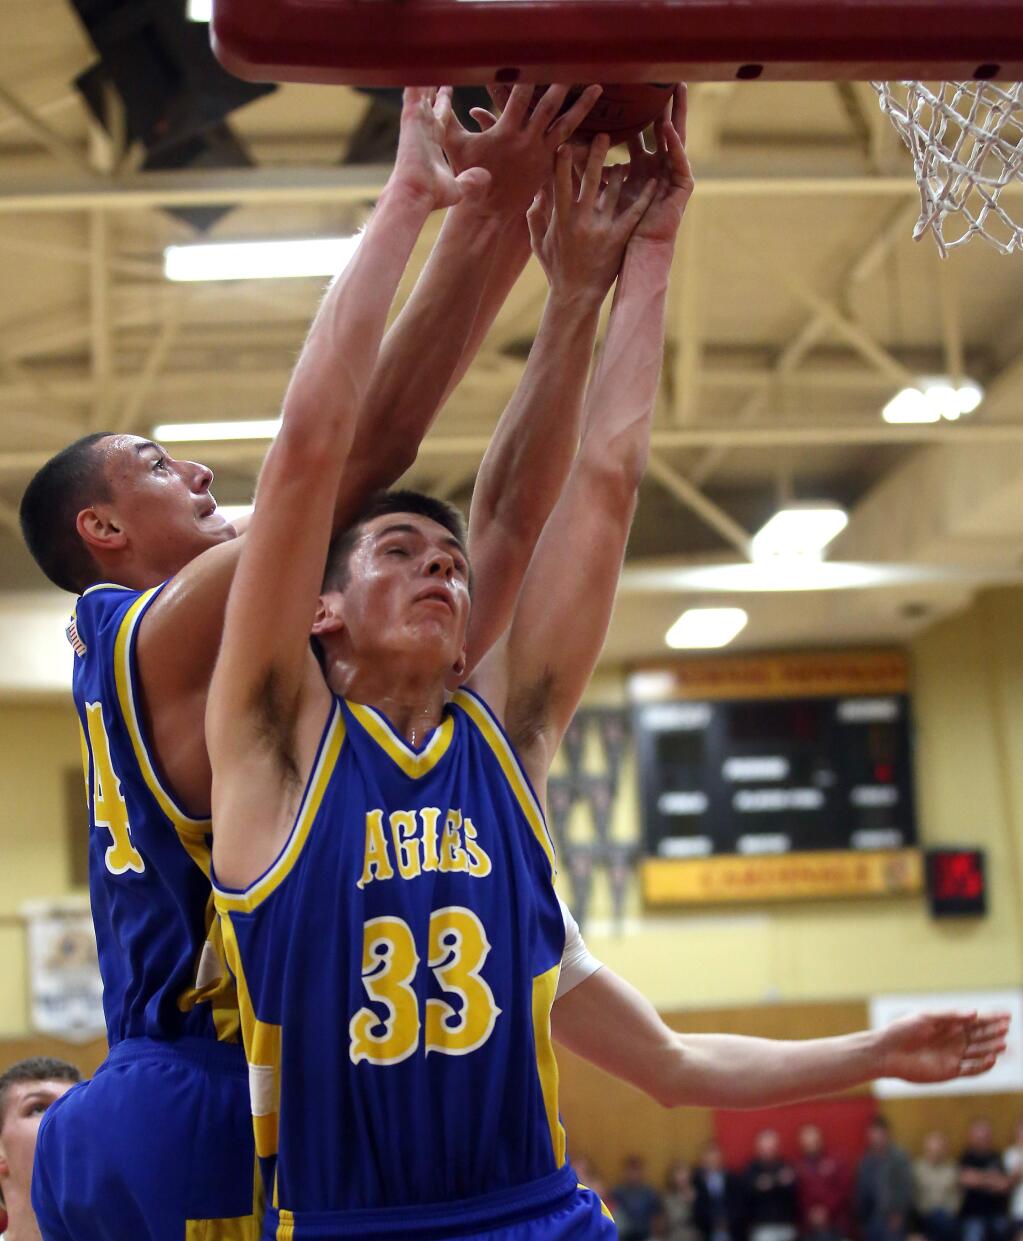 Cloverdale's Jayson McMillan, right, goes up for a rebound during a game in February 2015. McMillan was selected by league coaches as the 2016 NCL I All-League Boys Basketball Most Valuable Player. (Crista Jeremiason / The Press Democrat)